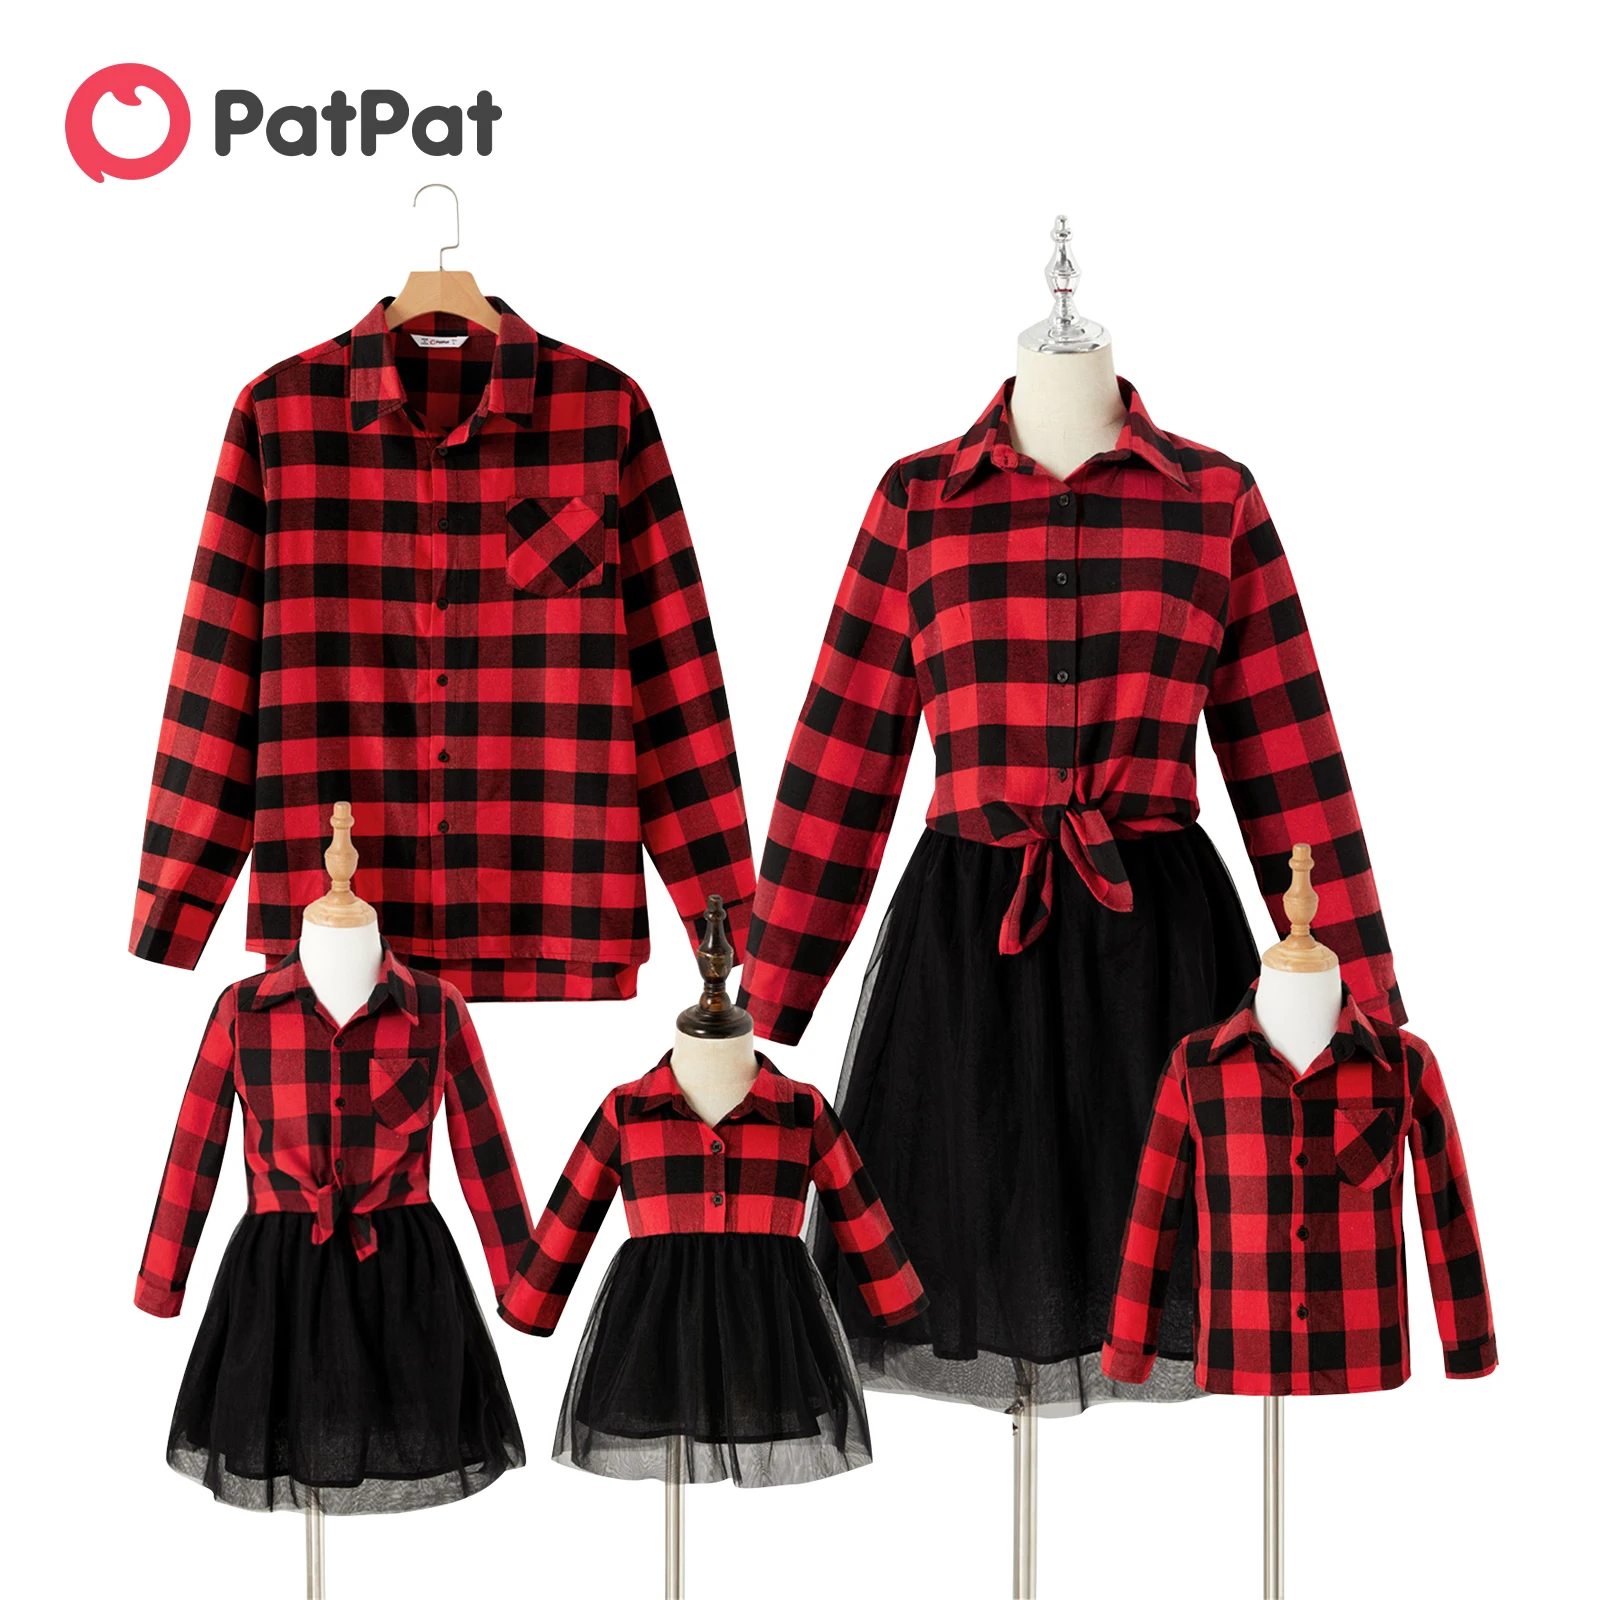 PatPat Christmas Family Matching Outfits Red Plaid Long-sleeve Button Up Shirts and Mesh Skirts Sets for Family Looks Clothes